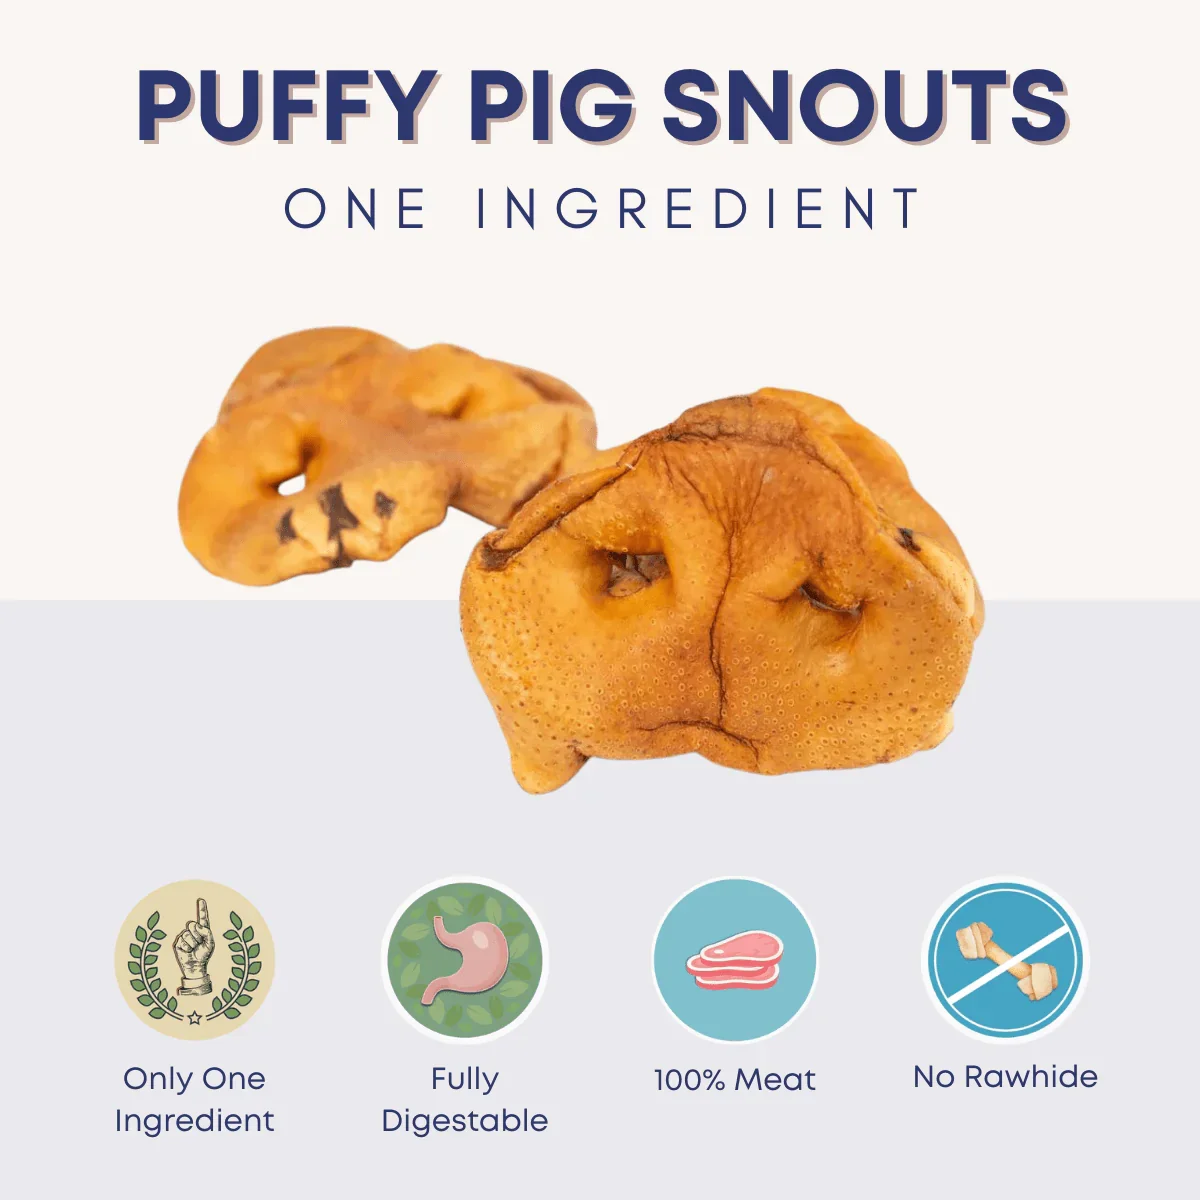 Image of Puffy Pig Snouts